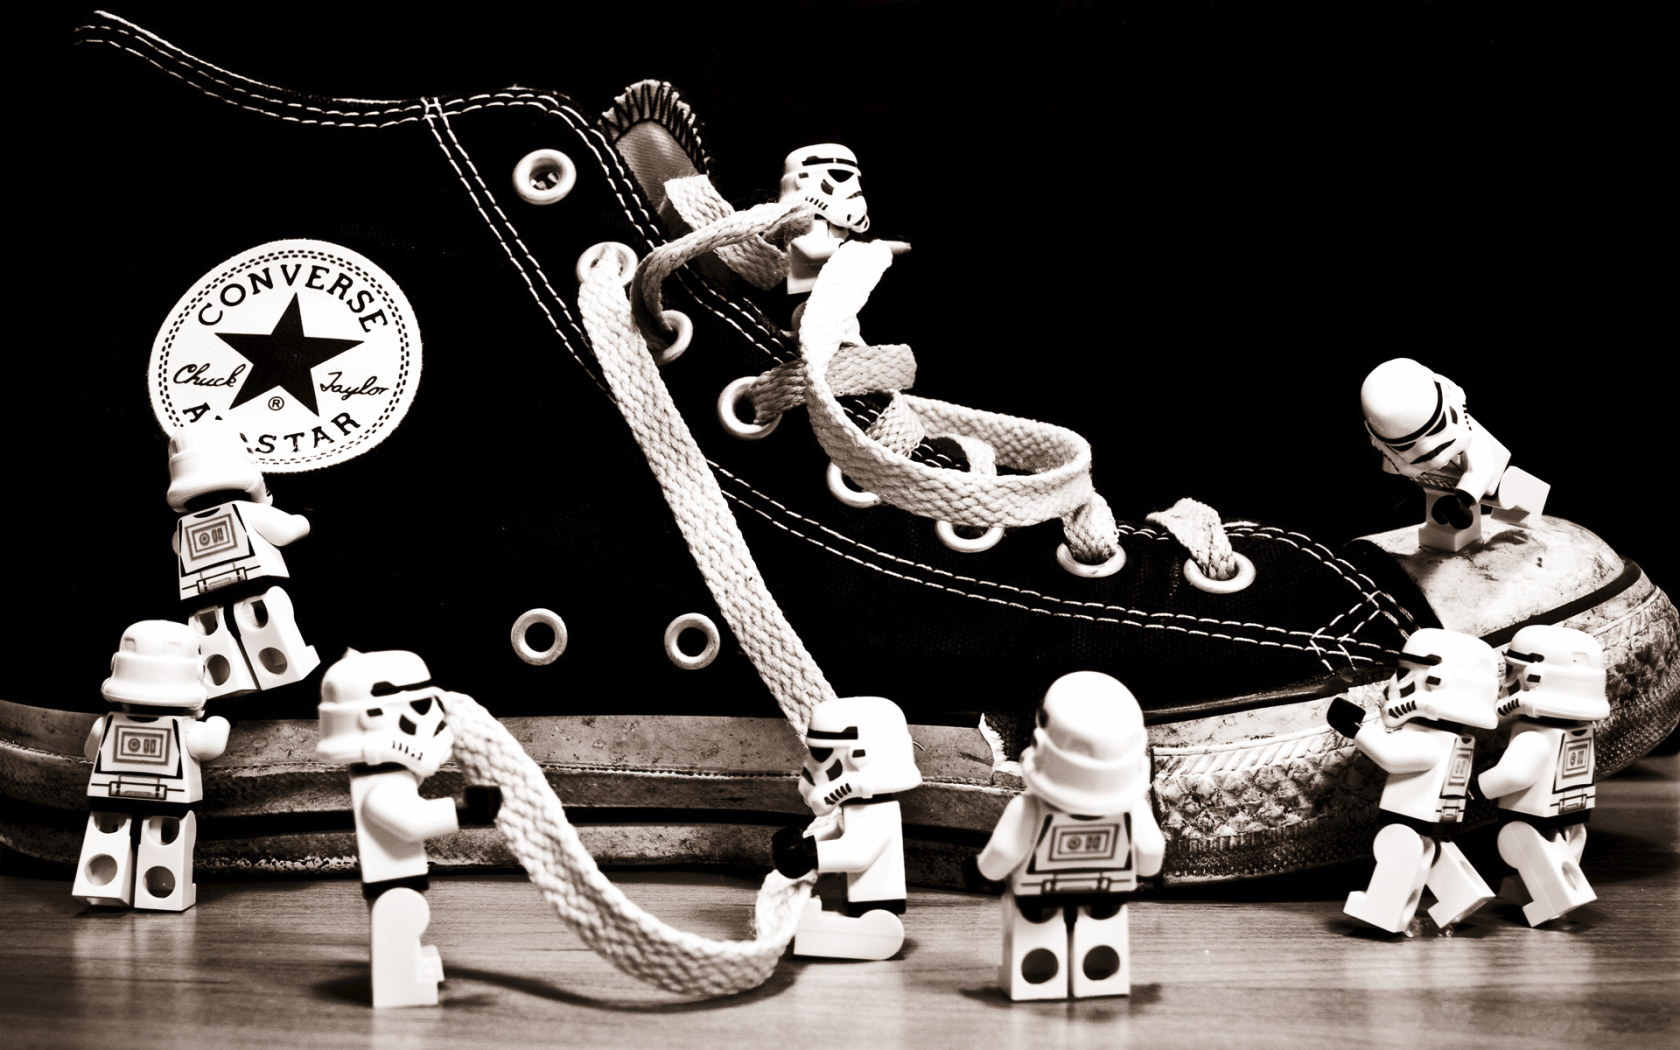 Converse Stormtroopers